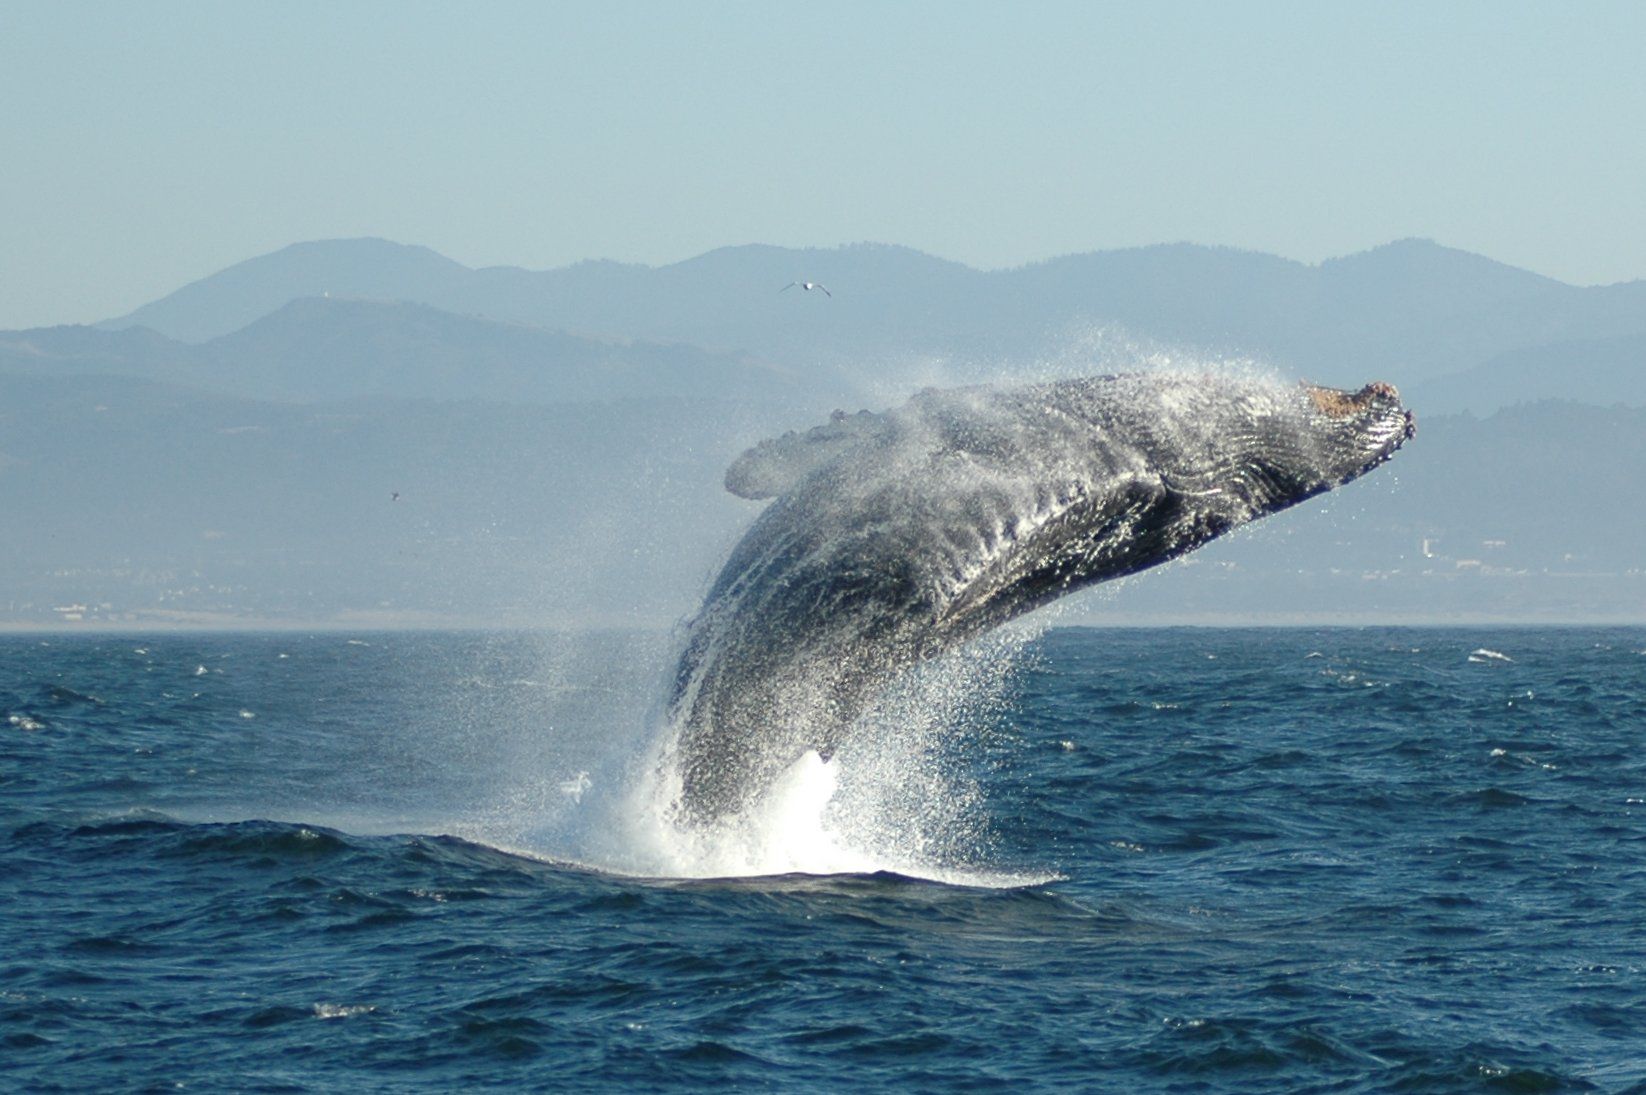 A humpback whale breaching the water, to a backdrop of the sea, hills, and mountains.